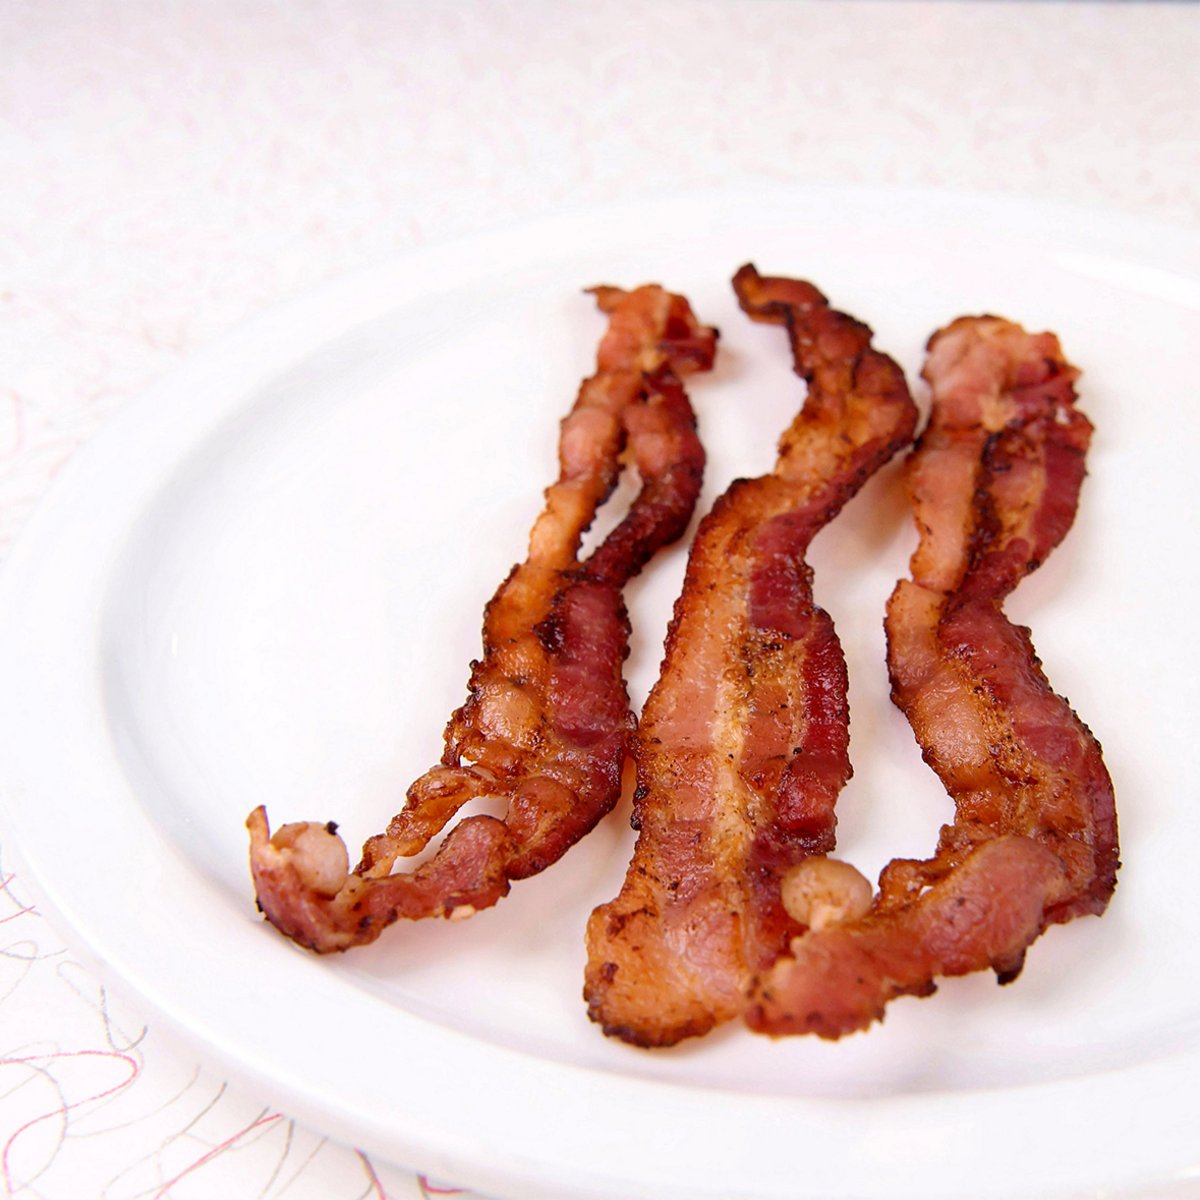 #Bacon makes everything a little better. Don't you agree? Come by Penny's Diner Group and add a side of bacon. We won't tell 🤫🤐 #PennysDiner #instayum